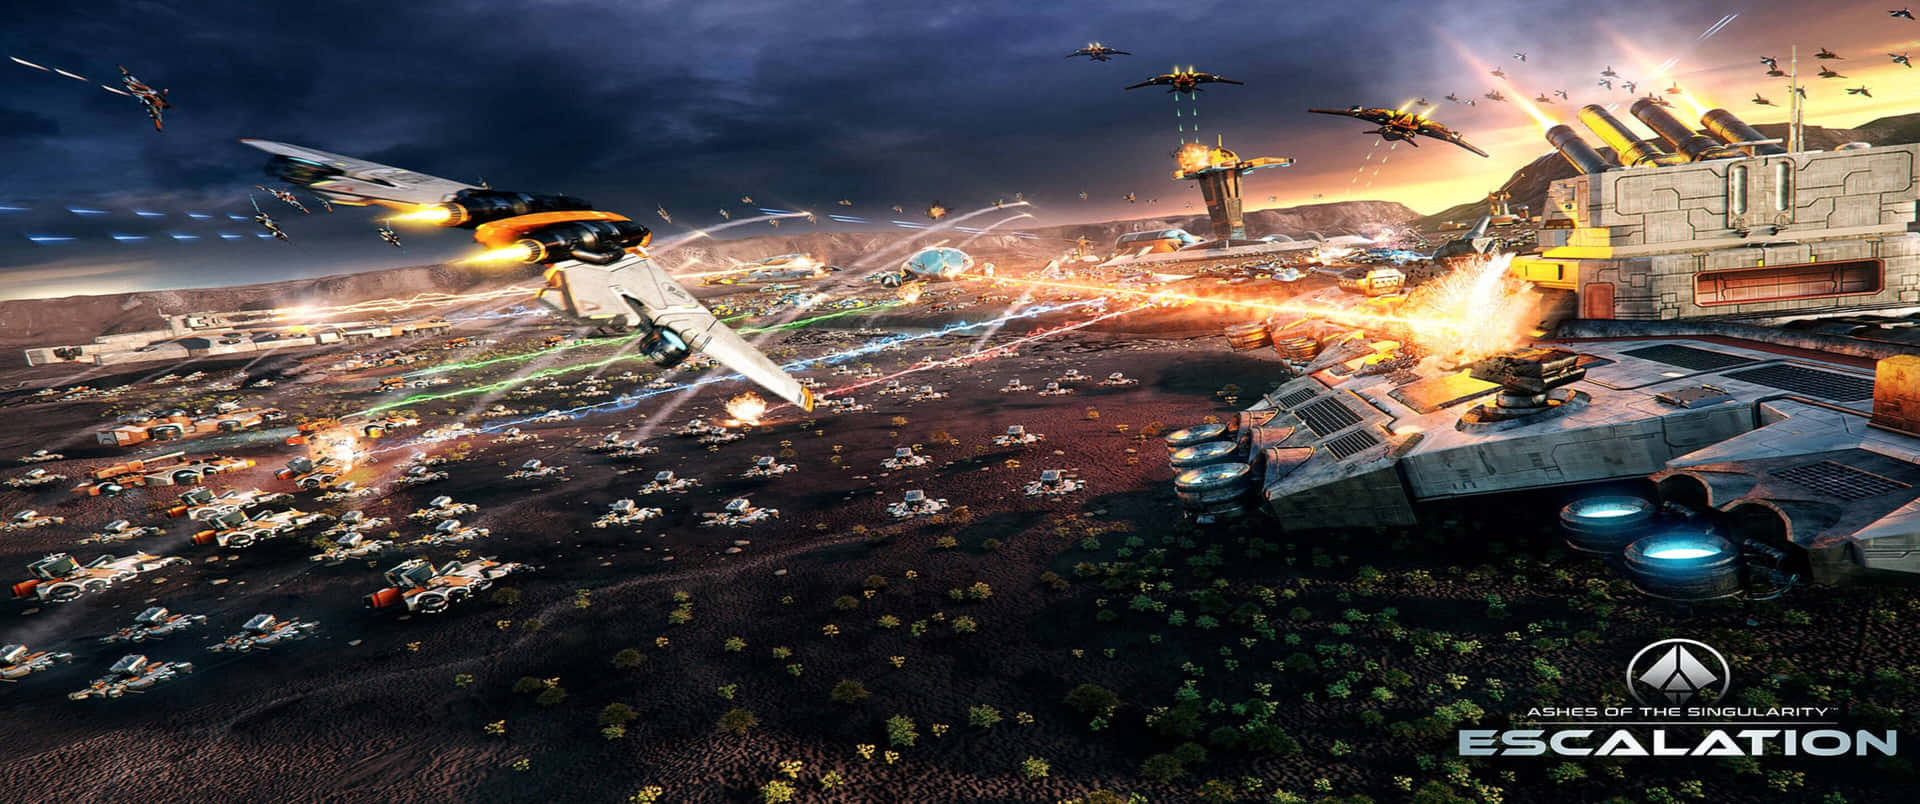 Experience Incredible Sci-Fi Battles in Ashes of the Singularity Escalation